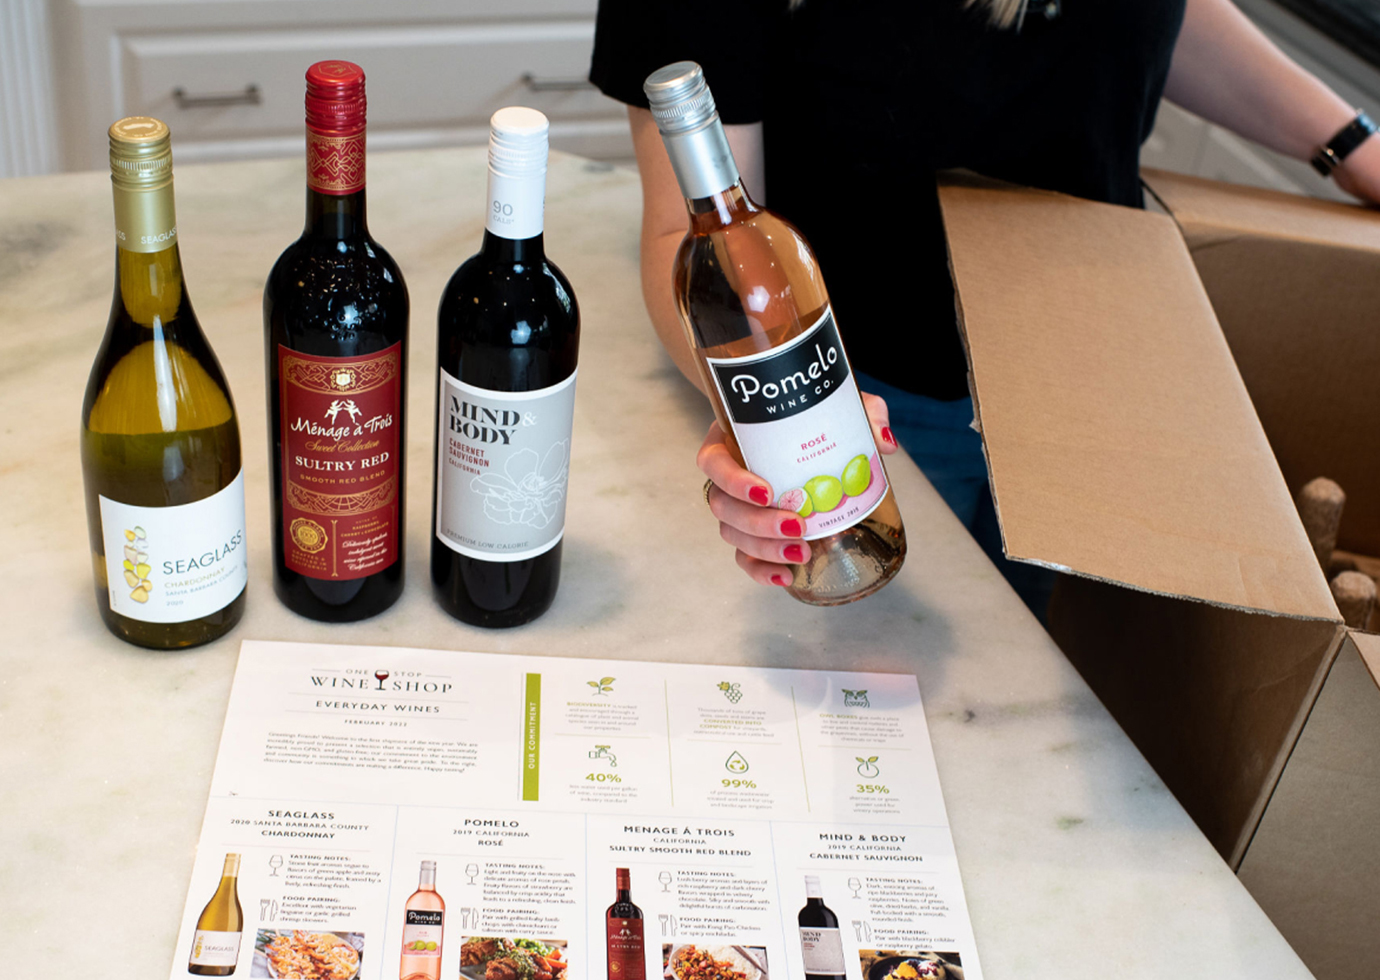 person unboxing and everyday wine club shipment from one stop wine wine shop wine club